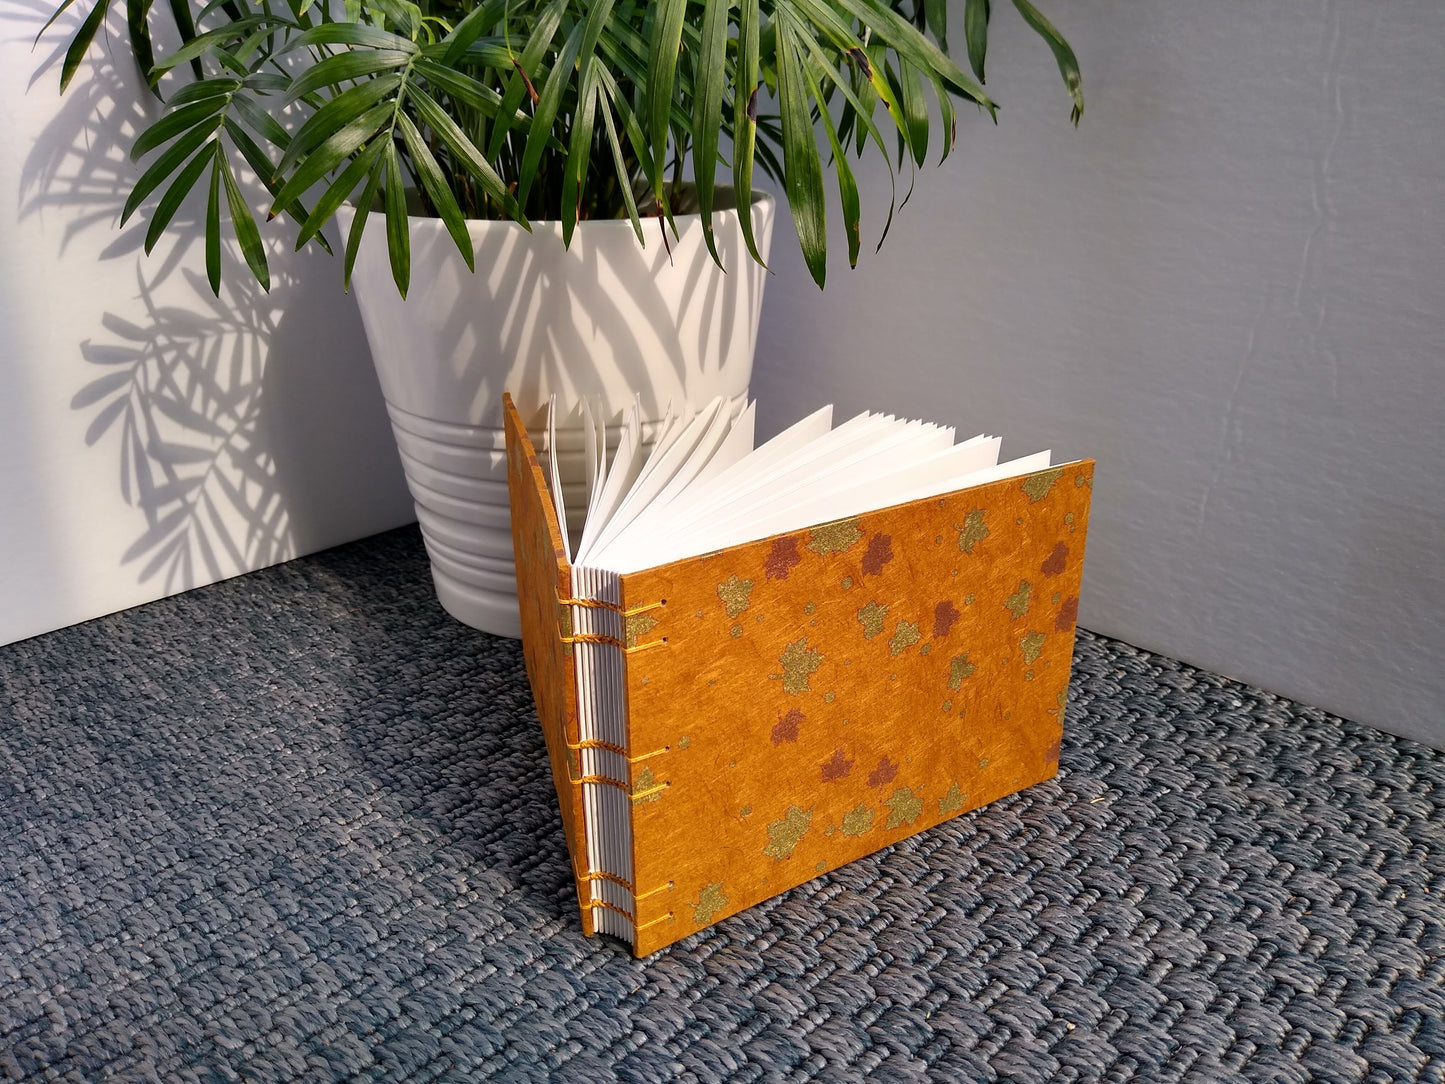 A handmade journal sits upright beside a potted plant. The cover of the journal is burnt orange with gold and copper maple leaves. It is angled to show the open spine held together with orange stitching.